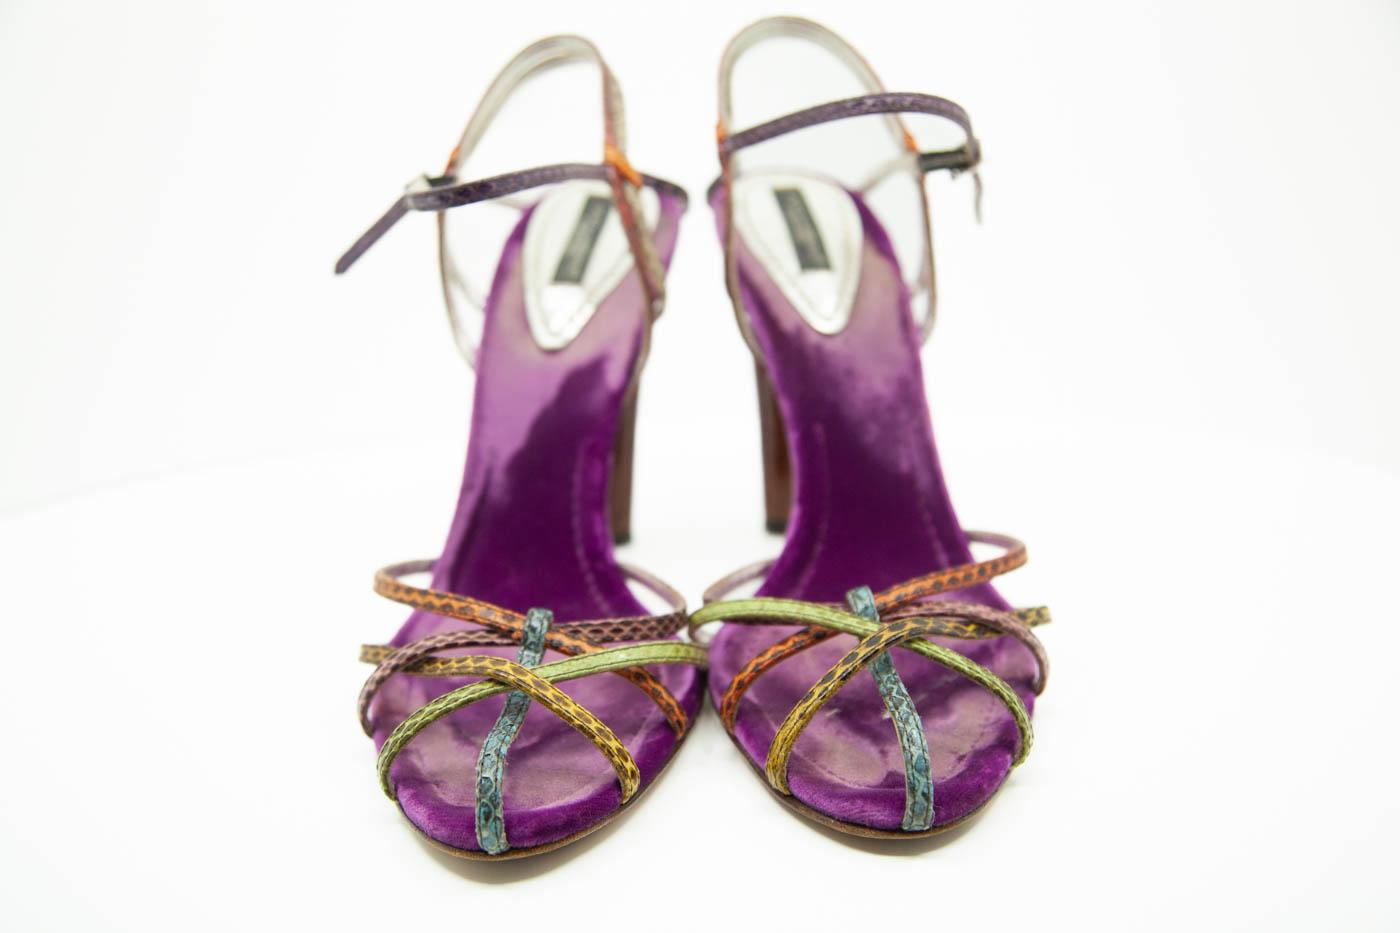 Dolce and Gabbana purple velvet colorful strappy heels

EU 39 